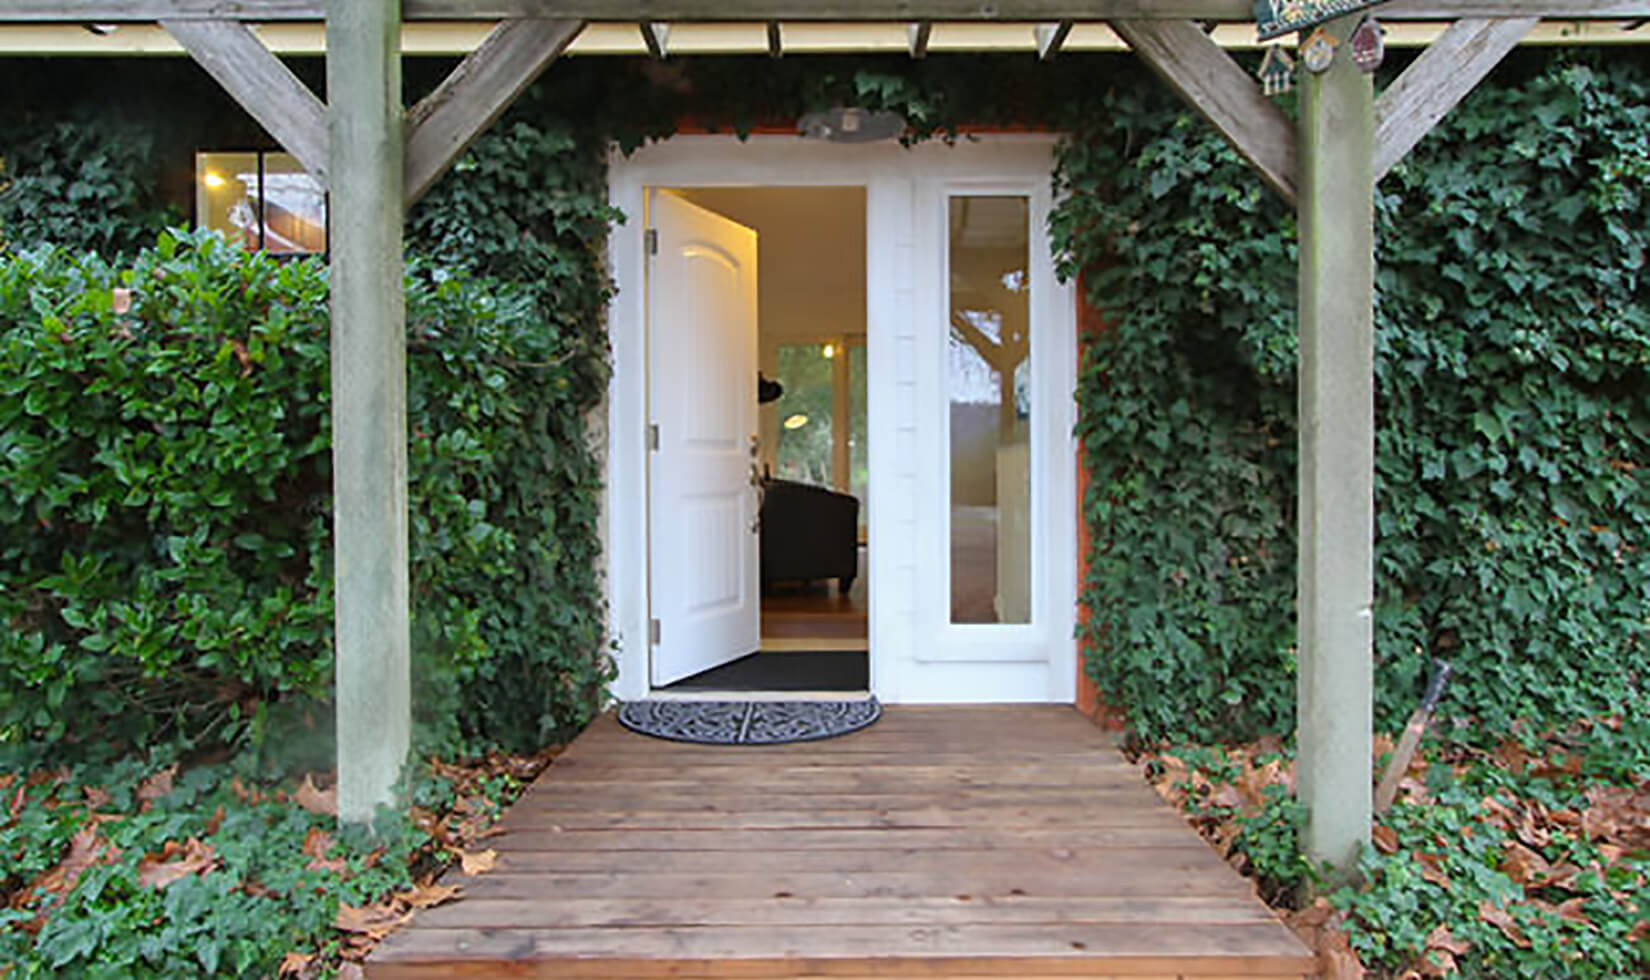 Welcoming front porch at Enriquez Estate’s secluded two-bedroom cottage in the vineyard.